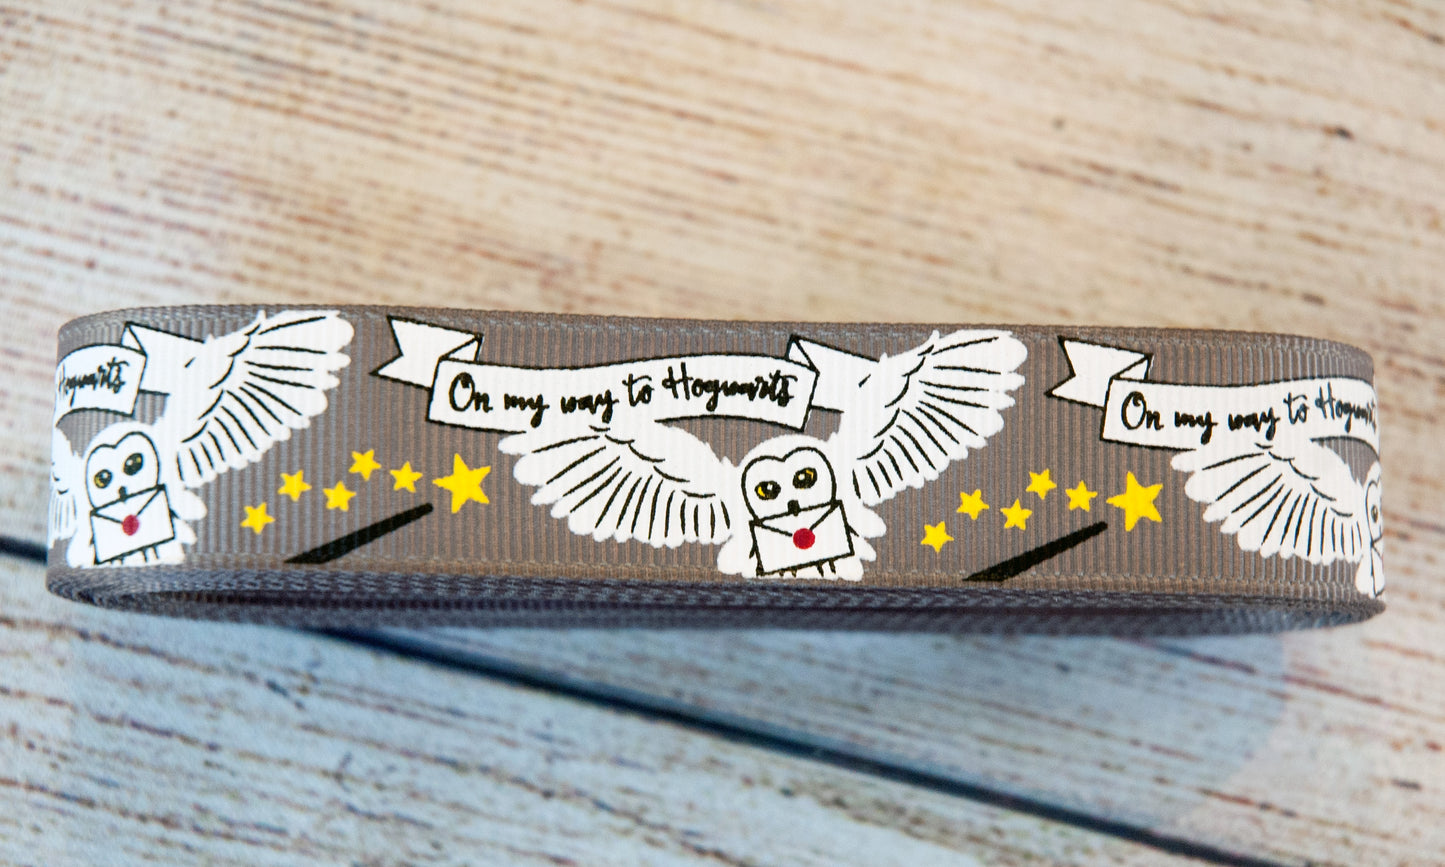 On my way to Hogwarts with Hedwig dog collar. 1 inch wide